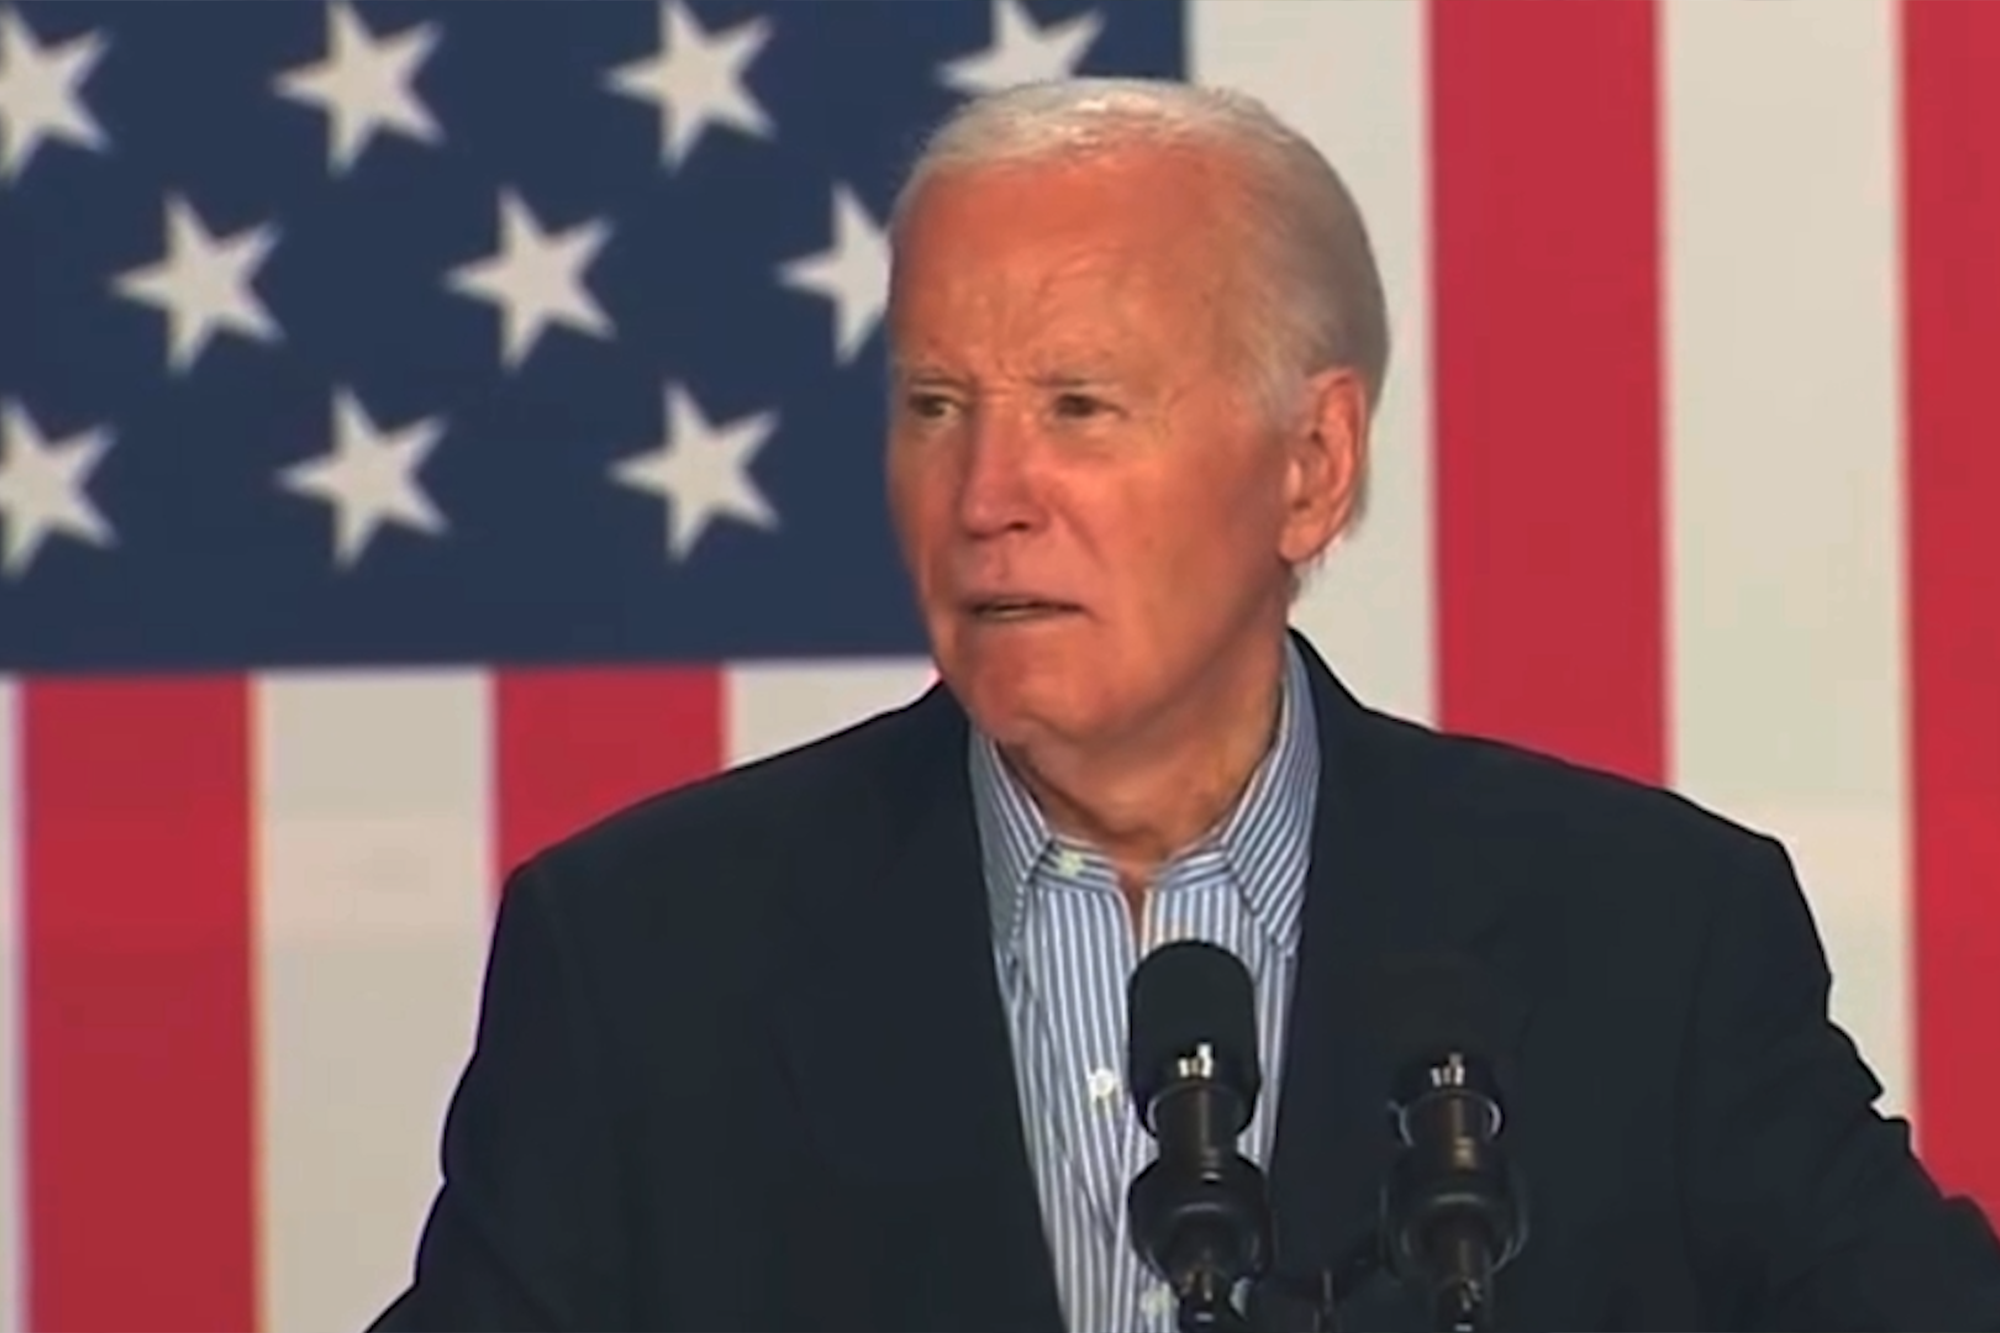 Defiant President Biden pledges at campaign rally: ‘I’m running and going to win again’